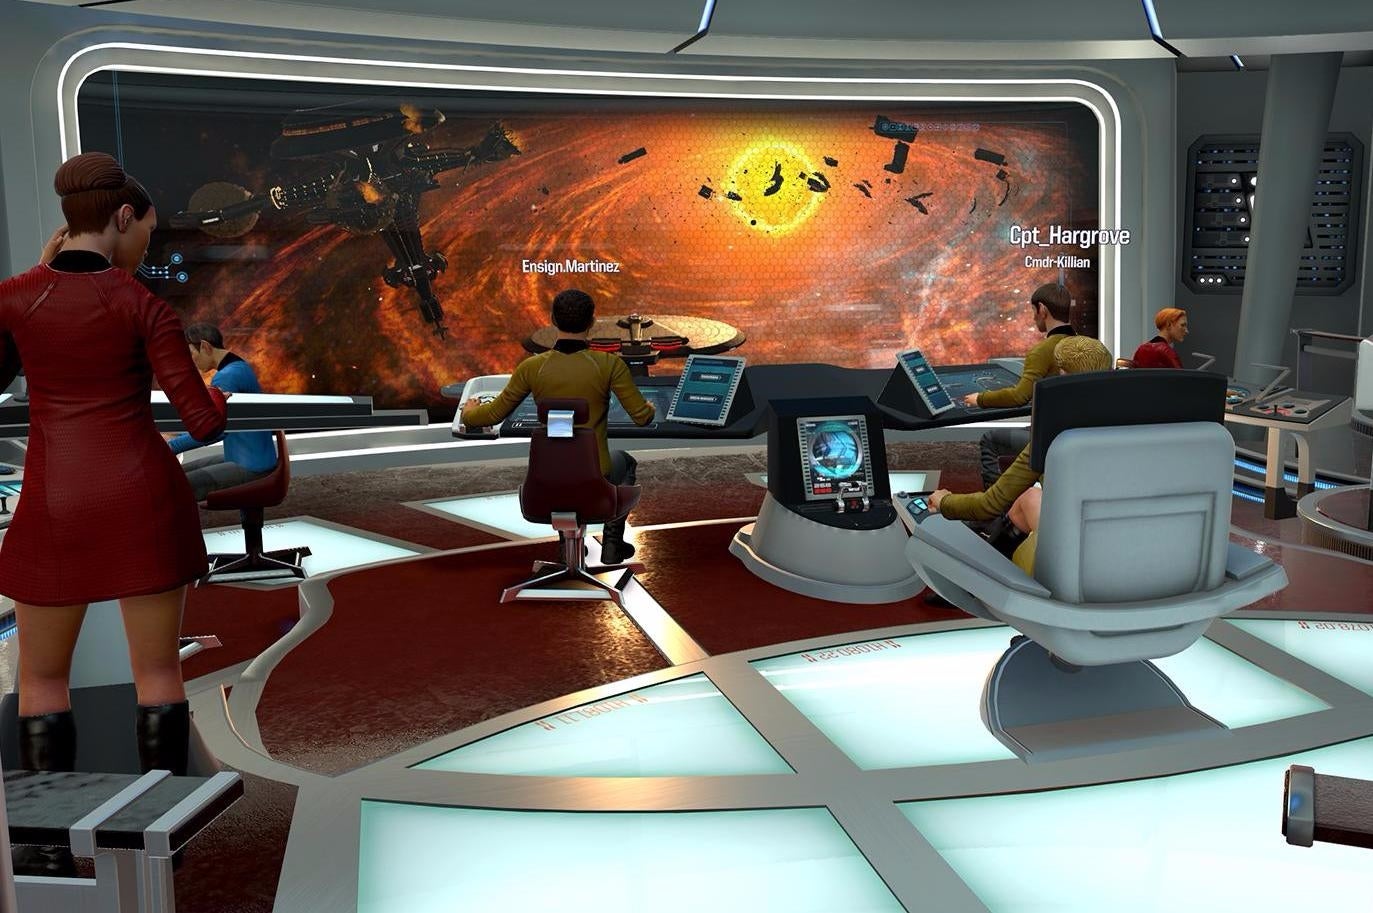 Image for HTC Vive now includes Star Trek: Bridge Crew as a free pack-in